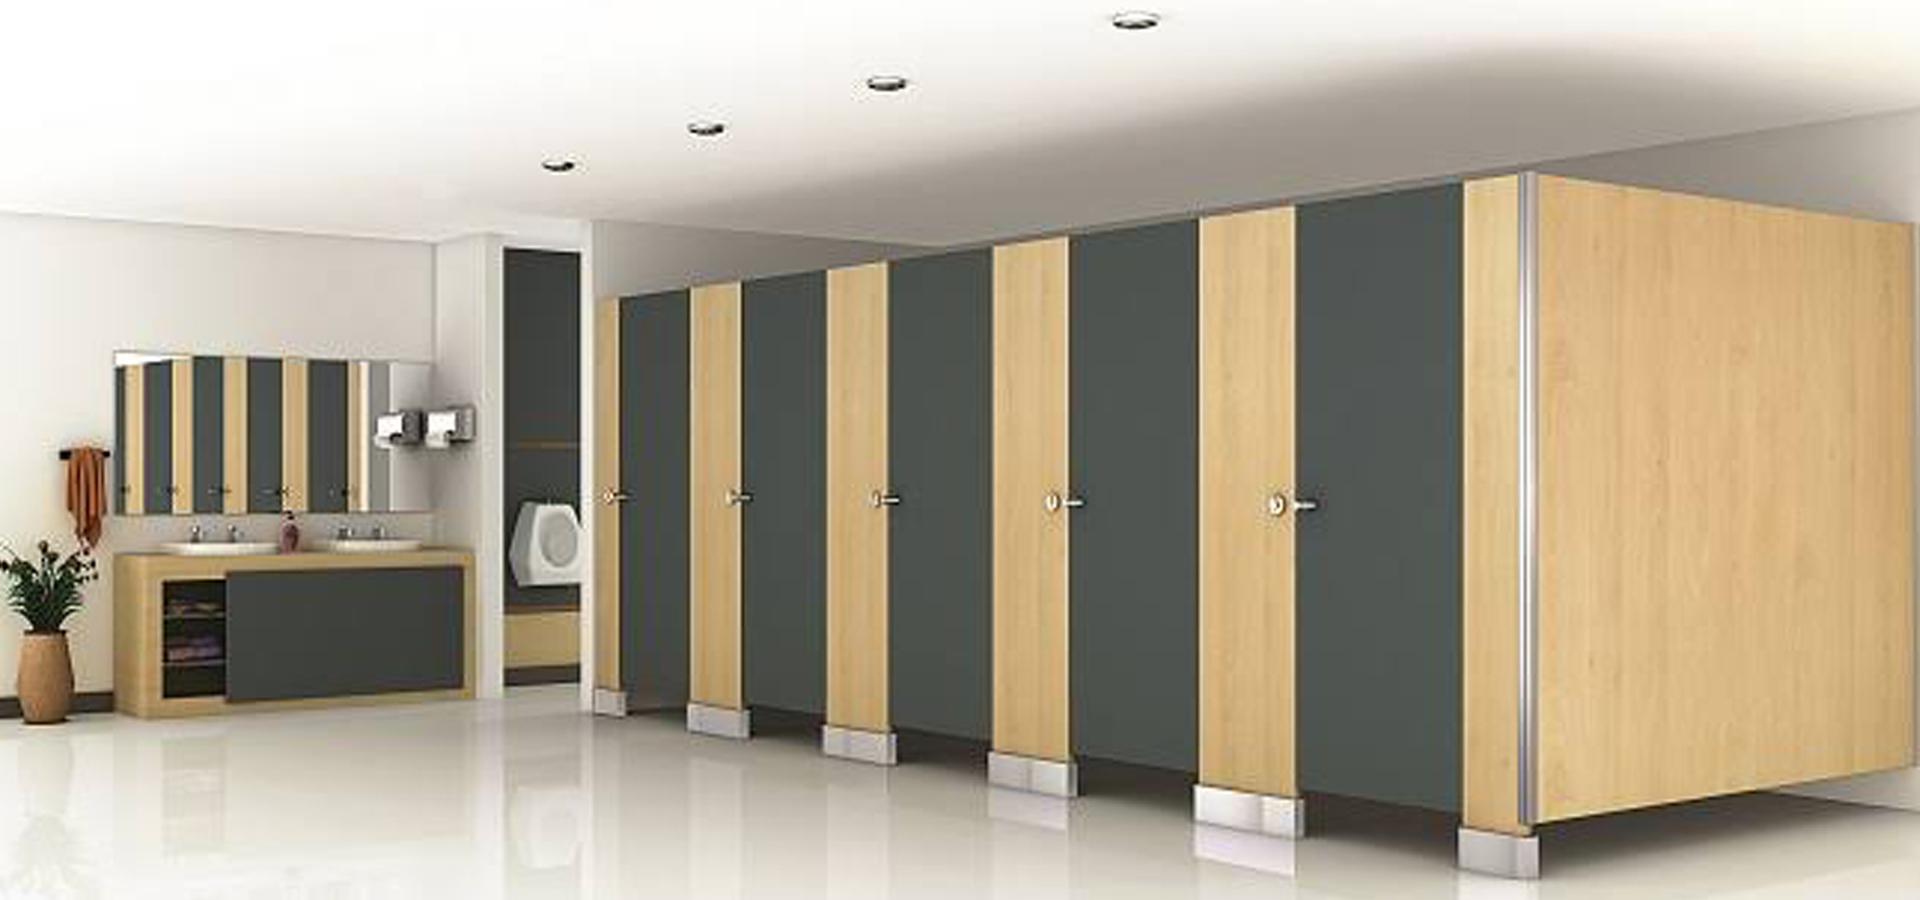 Toilet Cubicles and Toilet Partitions Manufacturers